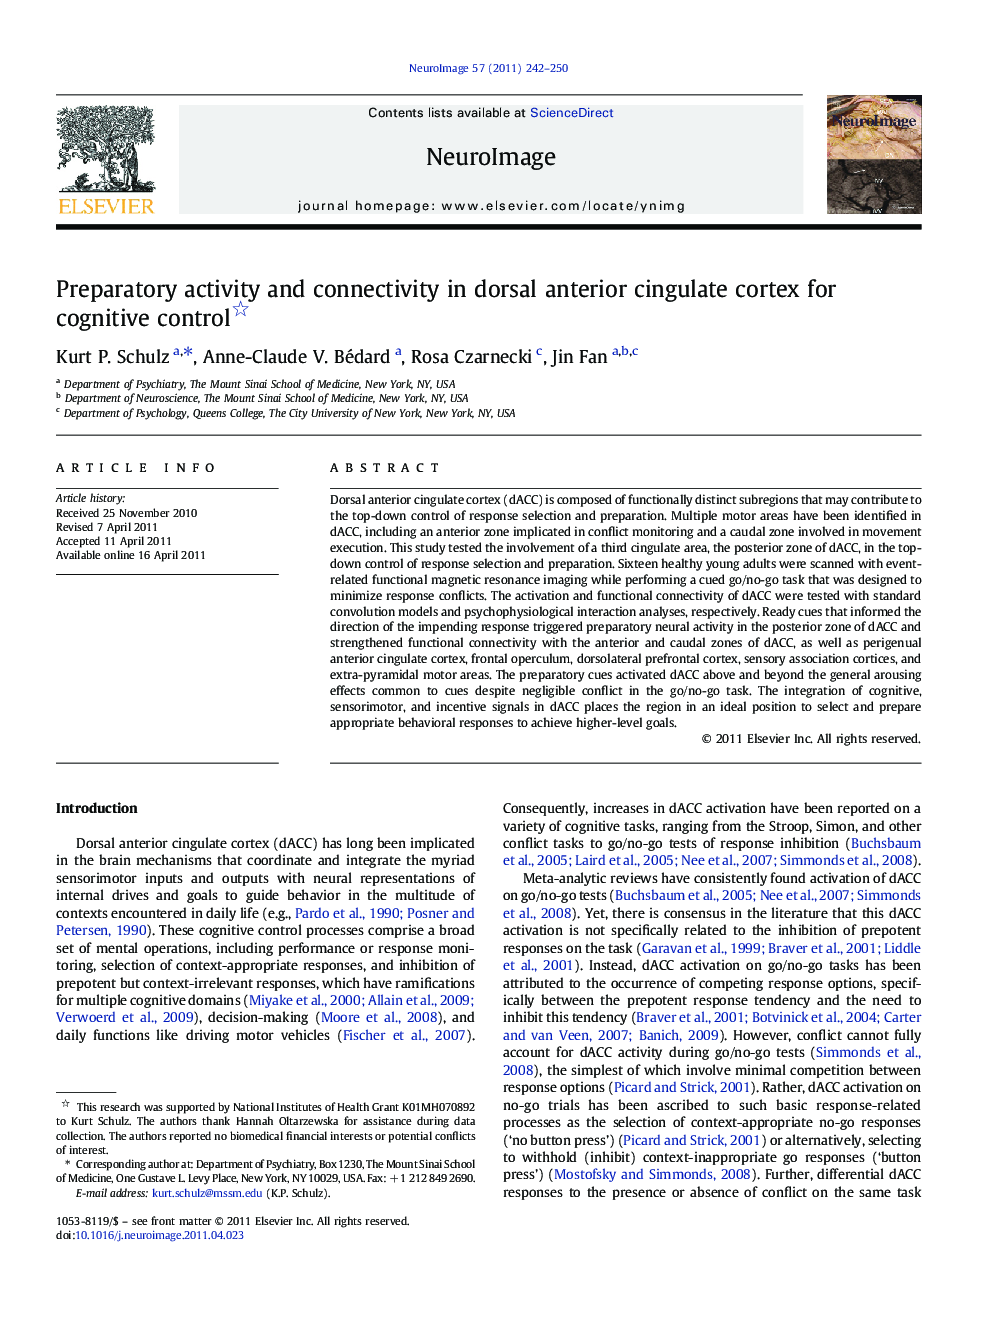 Preparatory activity and connectivity in dorsal anterior cingulate cortex for cognitive control